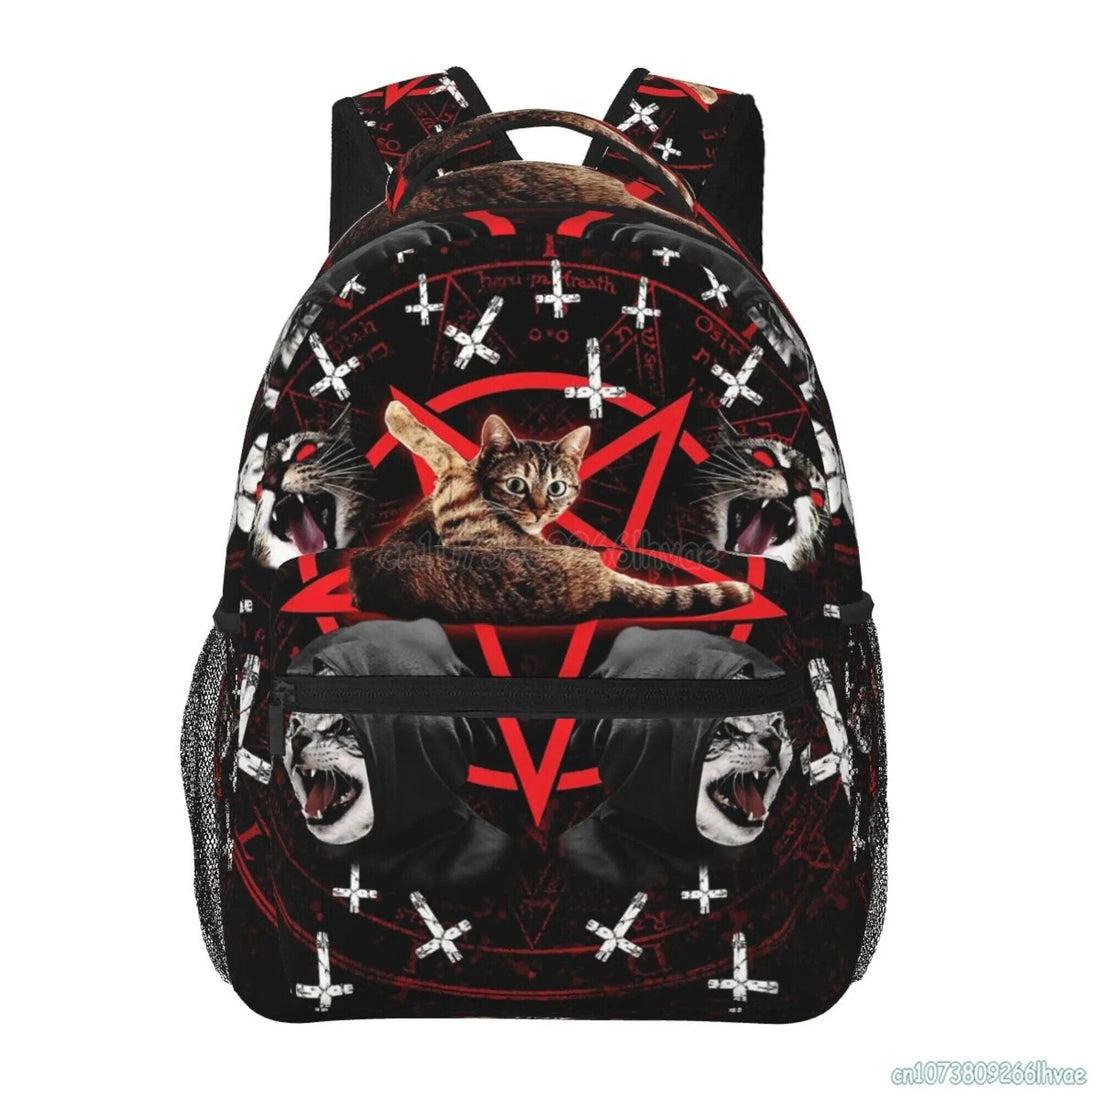 Funny Satanic Cat Printed Backpack - Just Cats - Gifts for Cat Lovers